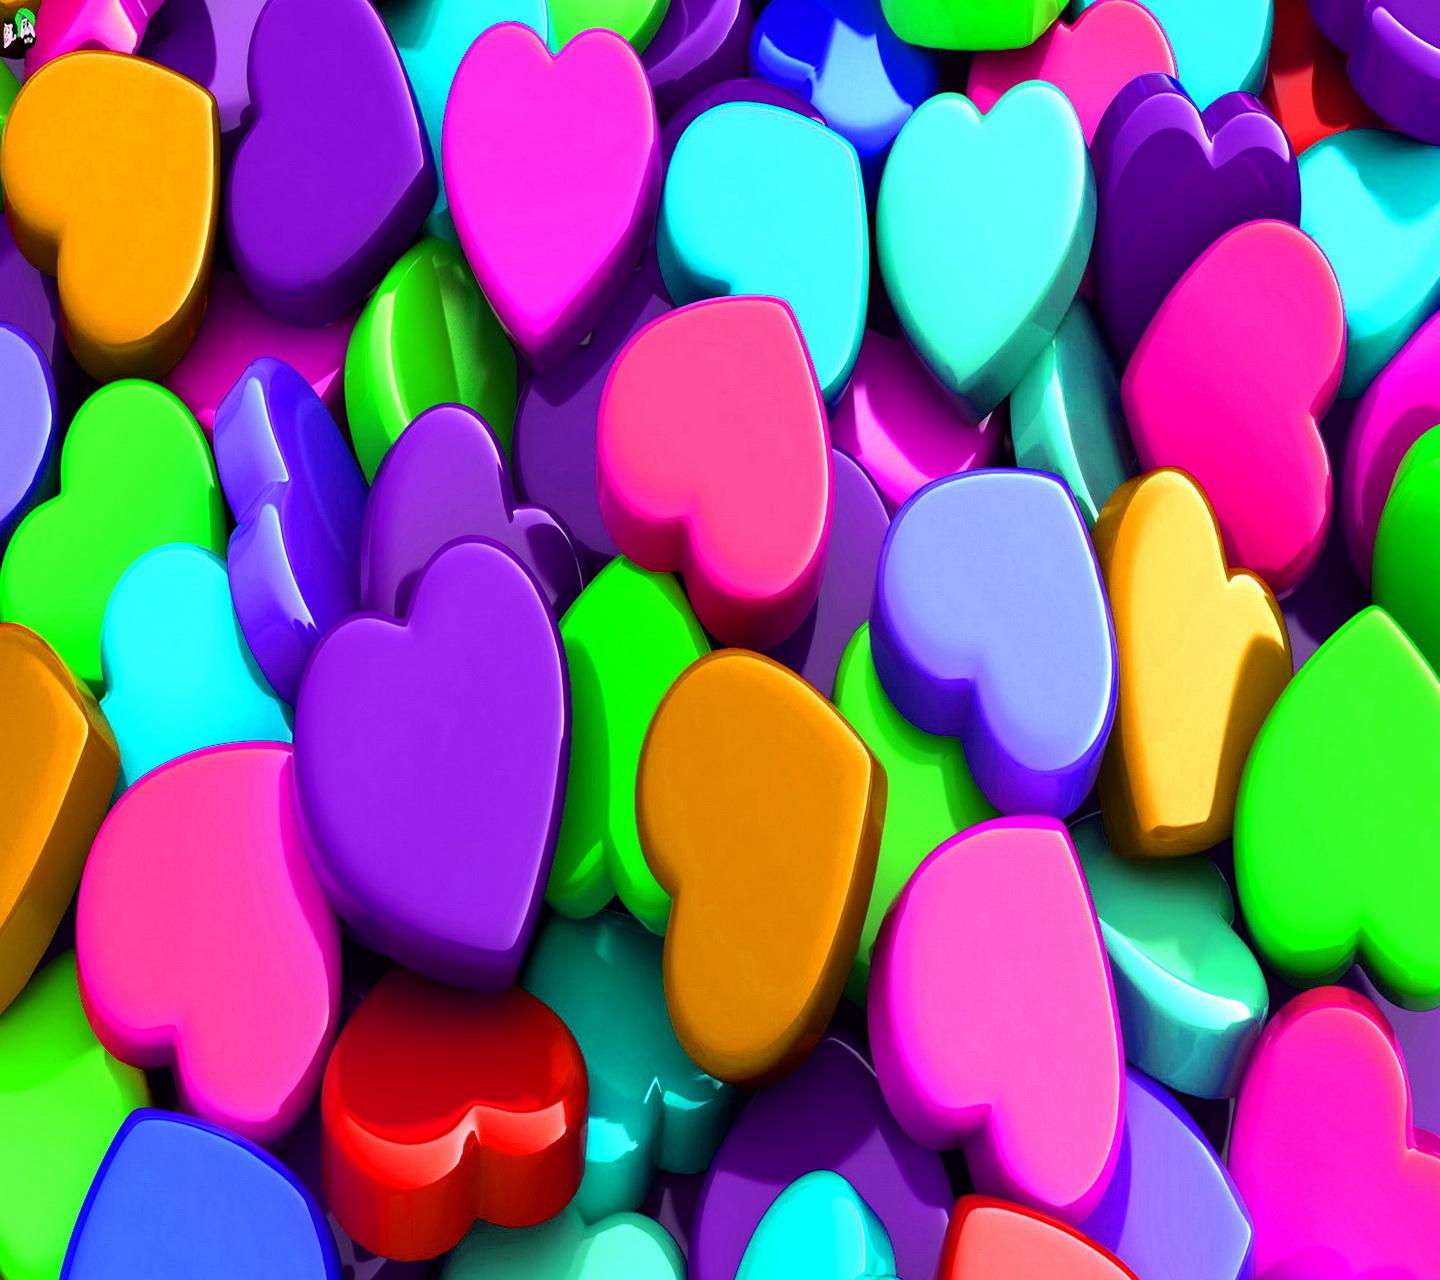 Download Colorful hearts hd wallpaper - Heart and rose hd ...